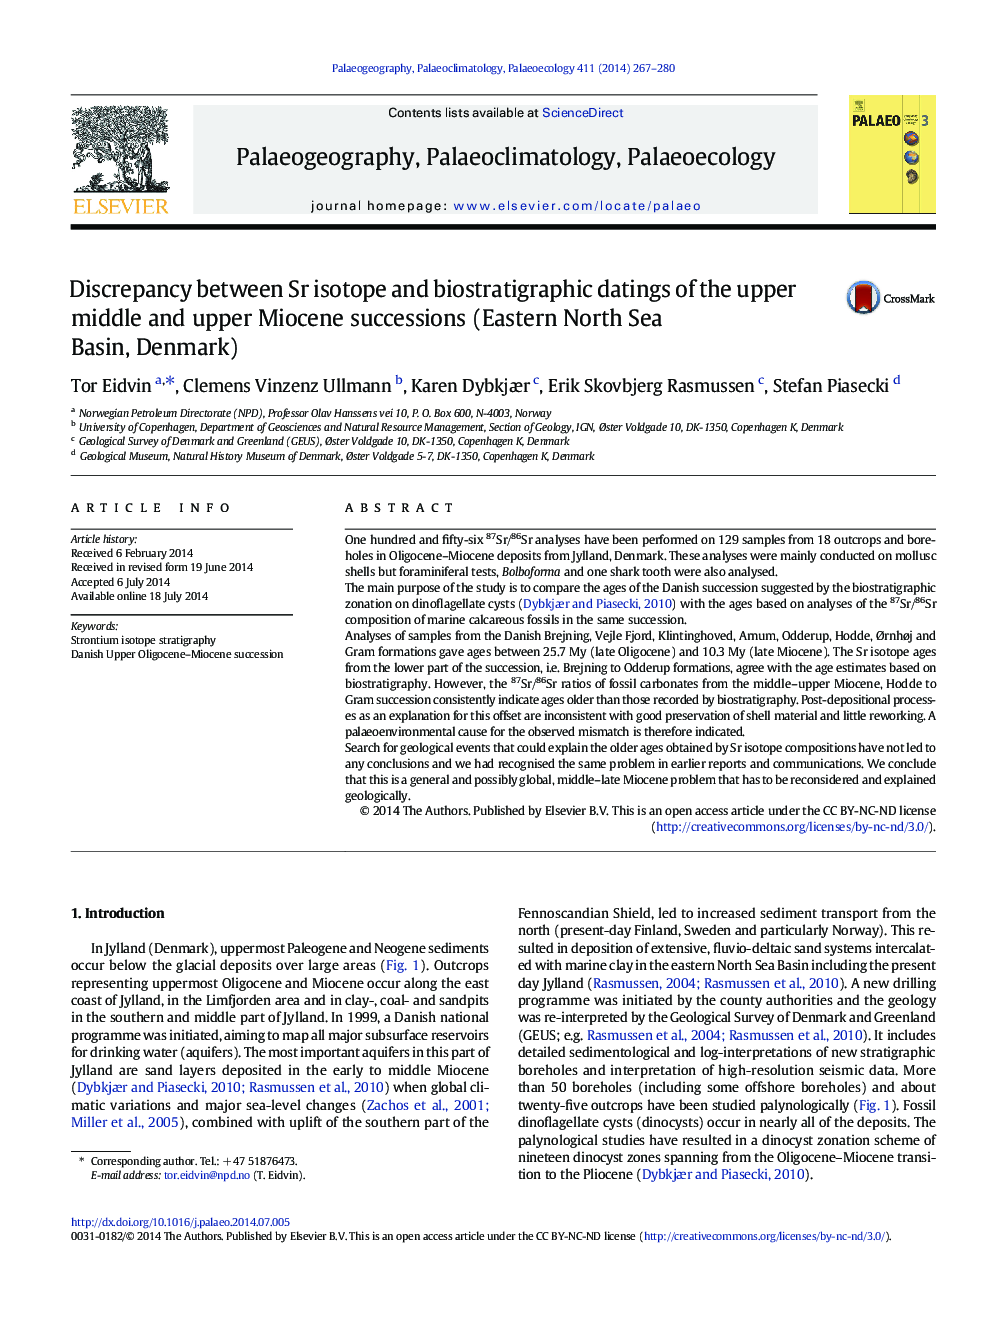 Discrepancy between Sr isotope and biostratigraphic datings of the upper middle and upper Miocene successions (Eastern North Sea Basin, Denmark)